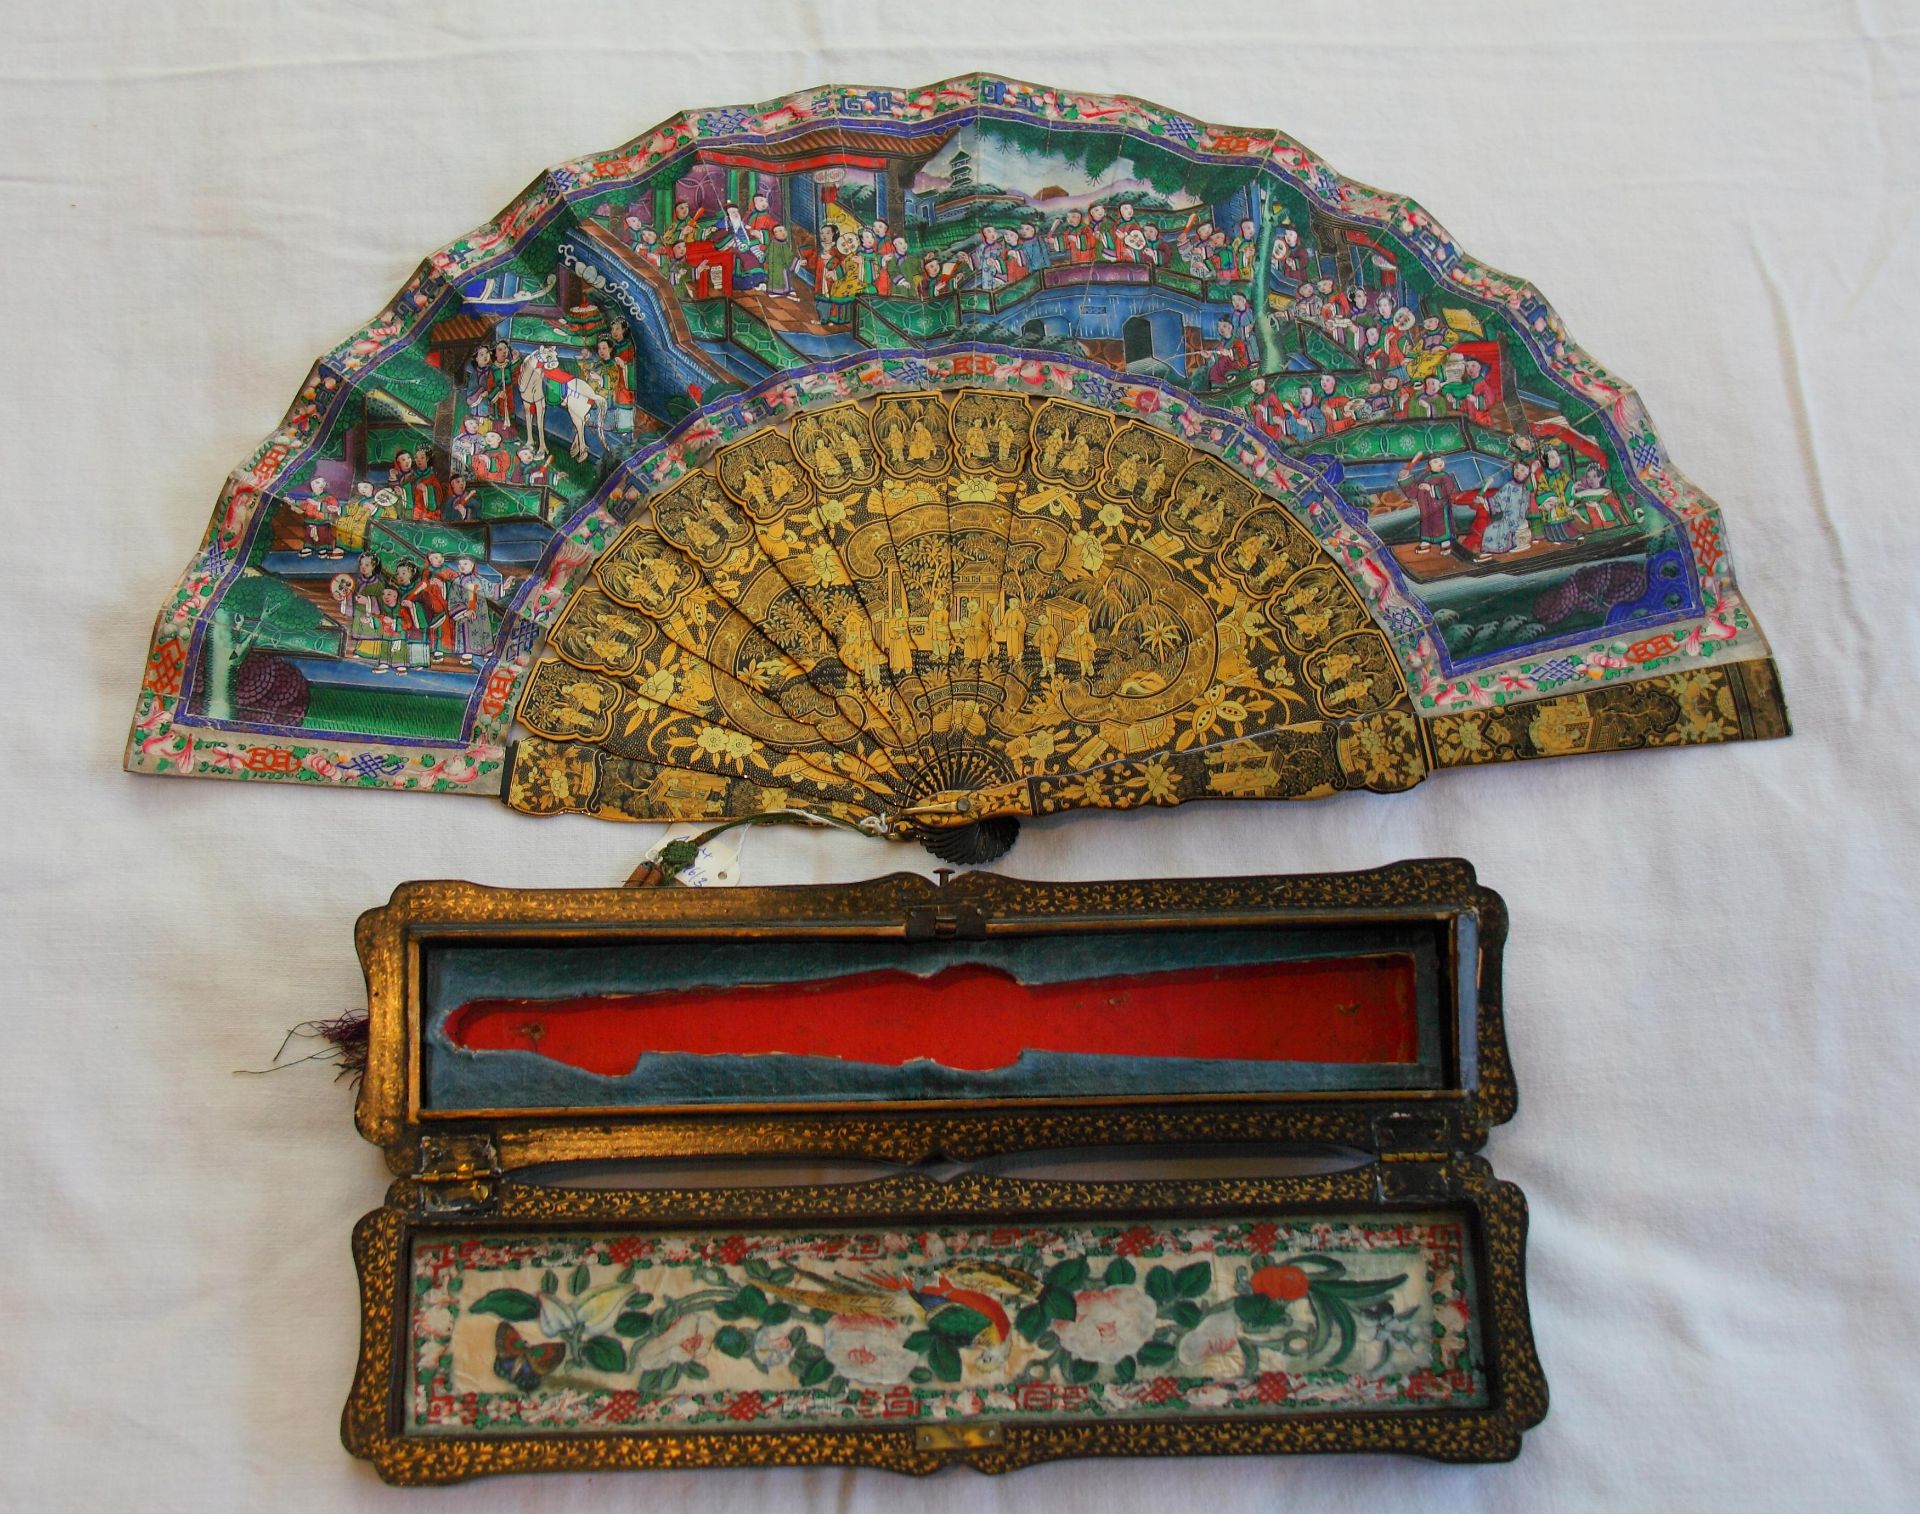 TWO FANS WITH GENRE SCENES, LANDSCAPES AND ANIMALS. Origin: China. Dynasty: Qing dynasty. Date: - Bild 3 aus 12